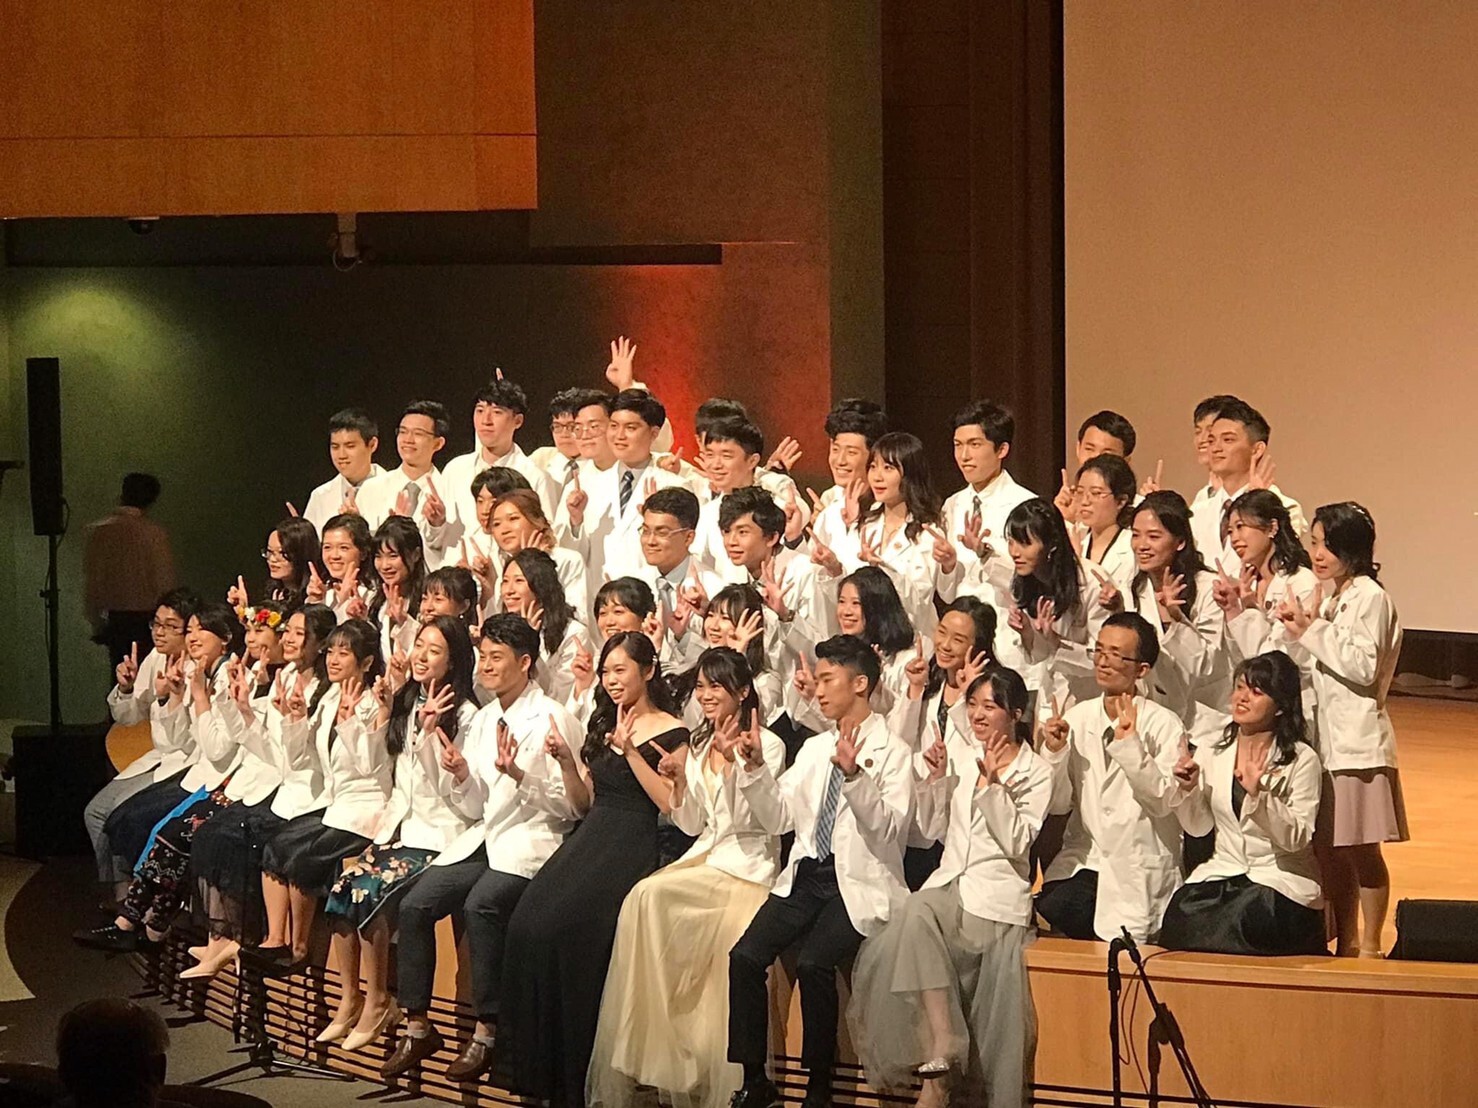 Group photo of students dressed in white robes. The right hand shows 1 and the left hand shows 4, to symbolize CM114.